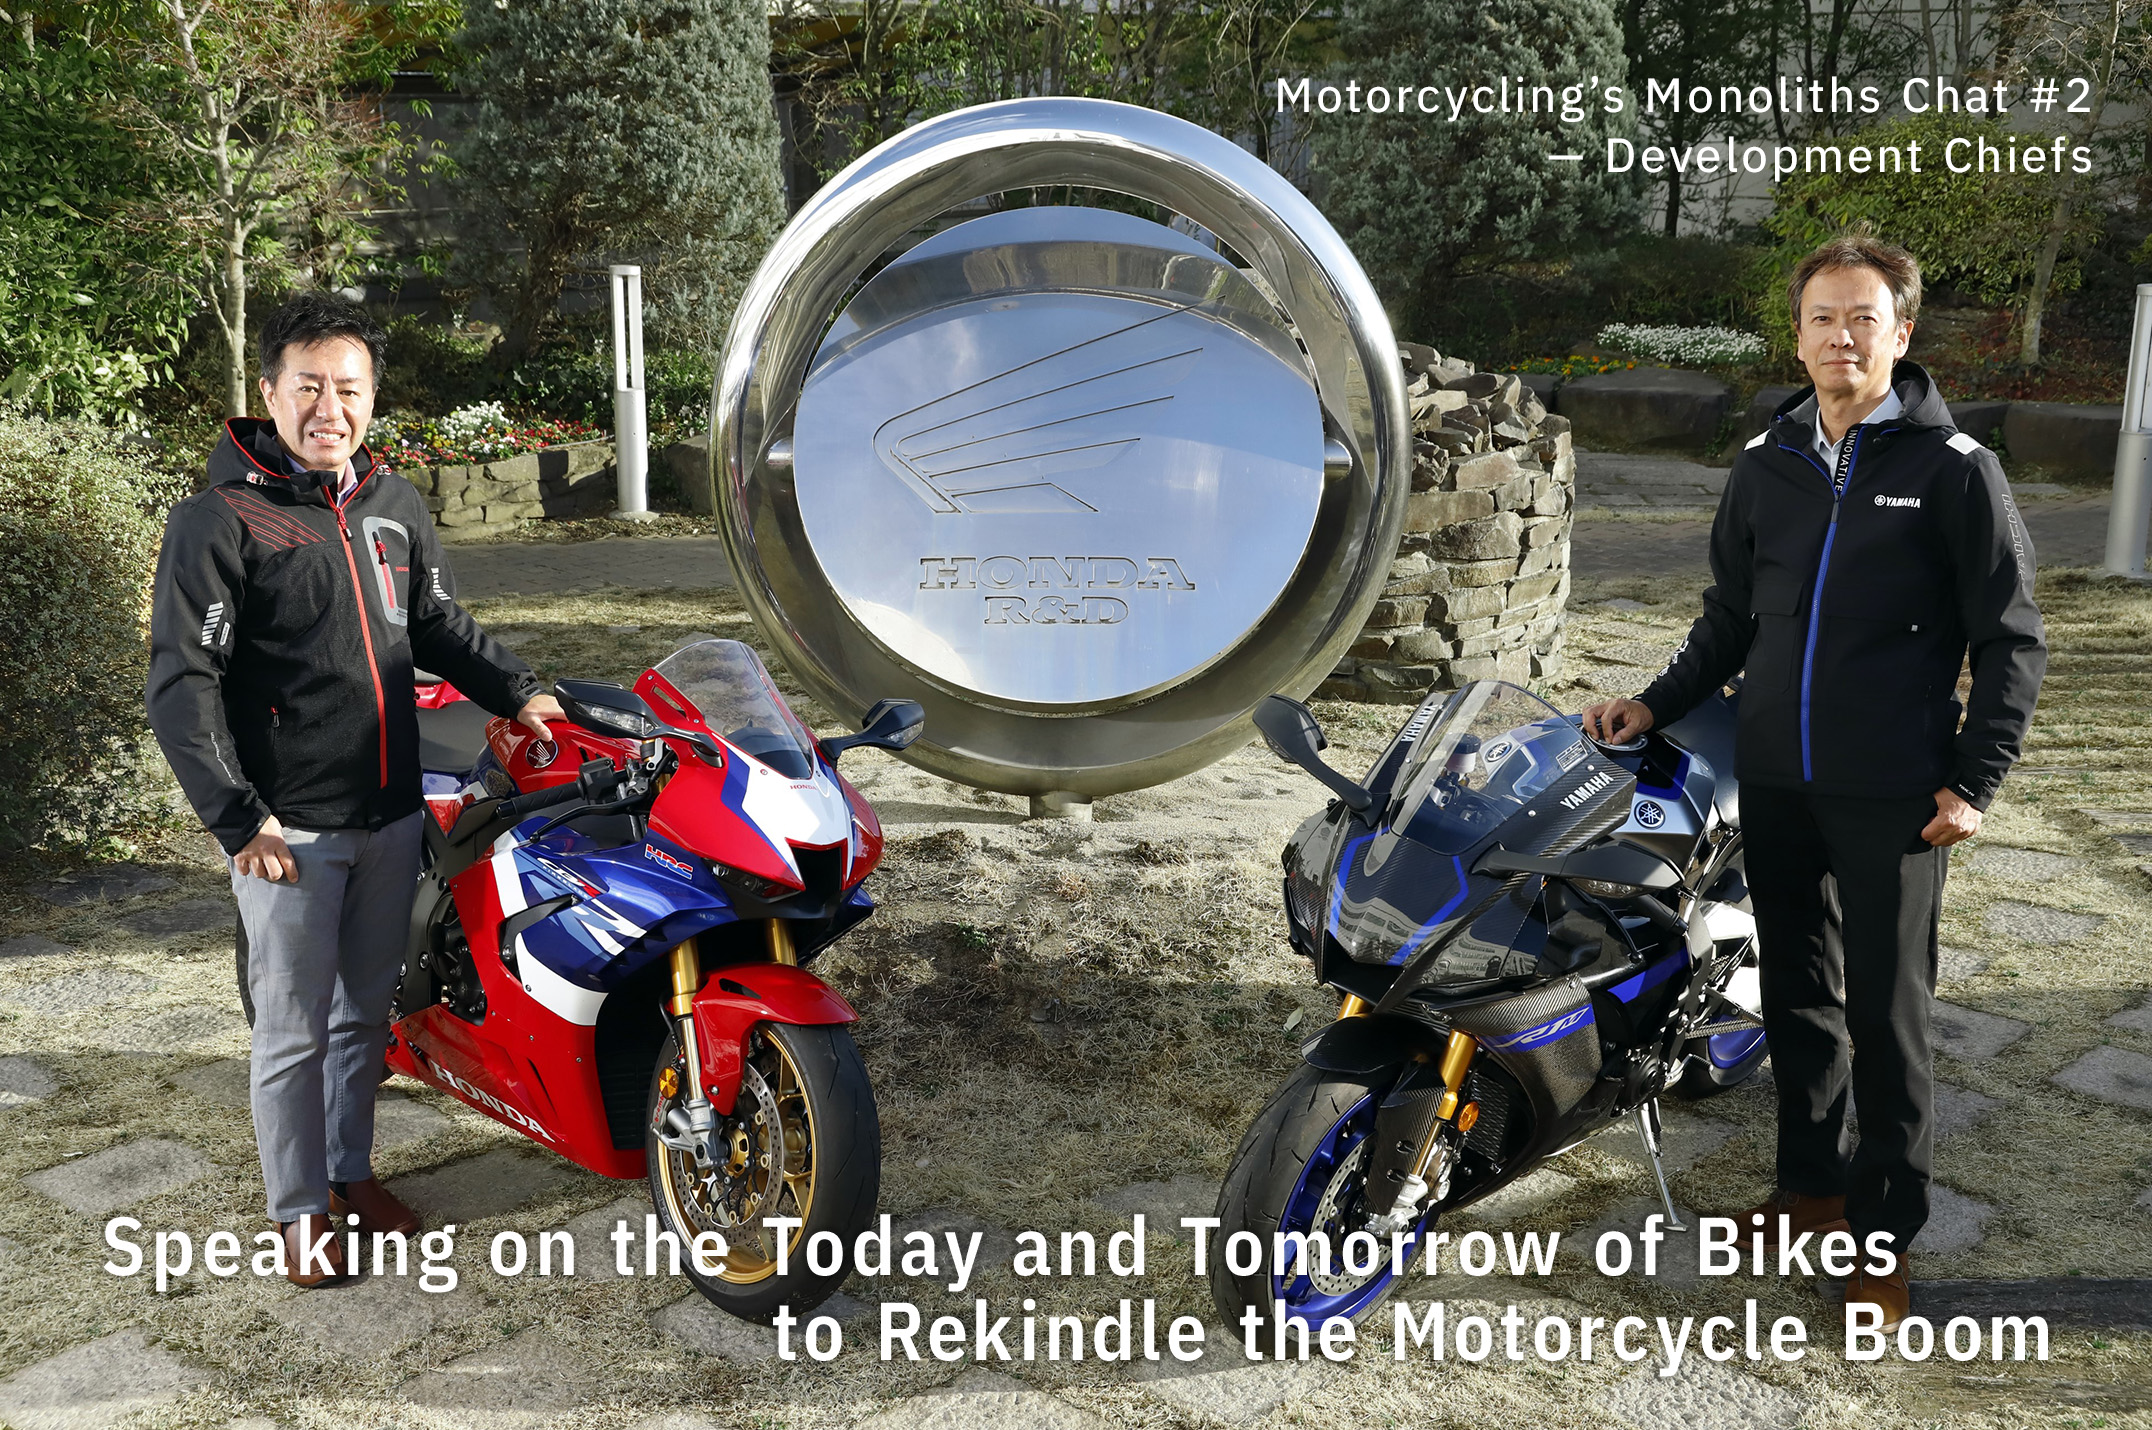 Speaking on the Today and Tomorrow of Bikes to Rekindle the Motorcycle Boom